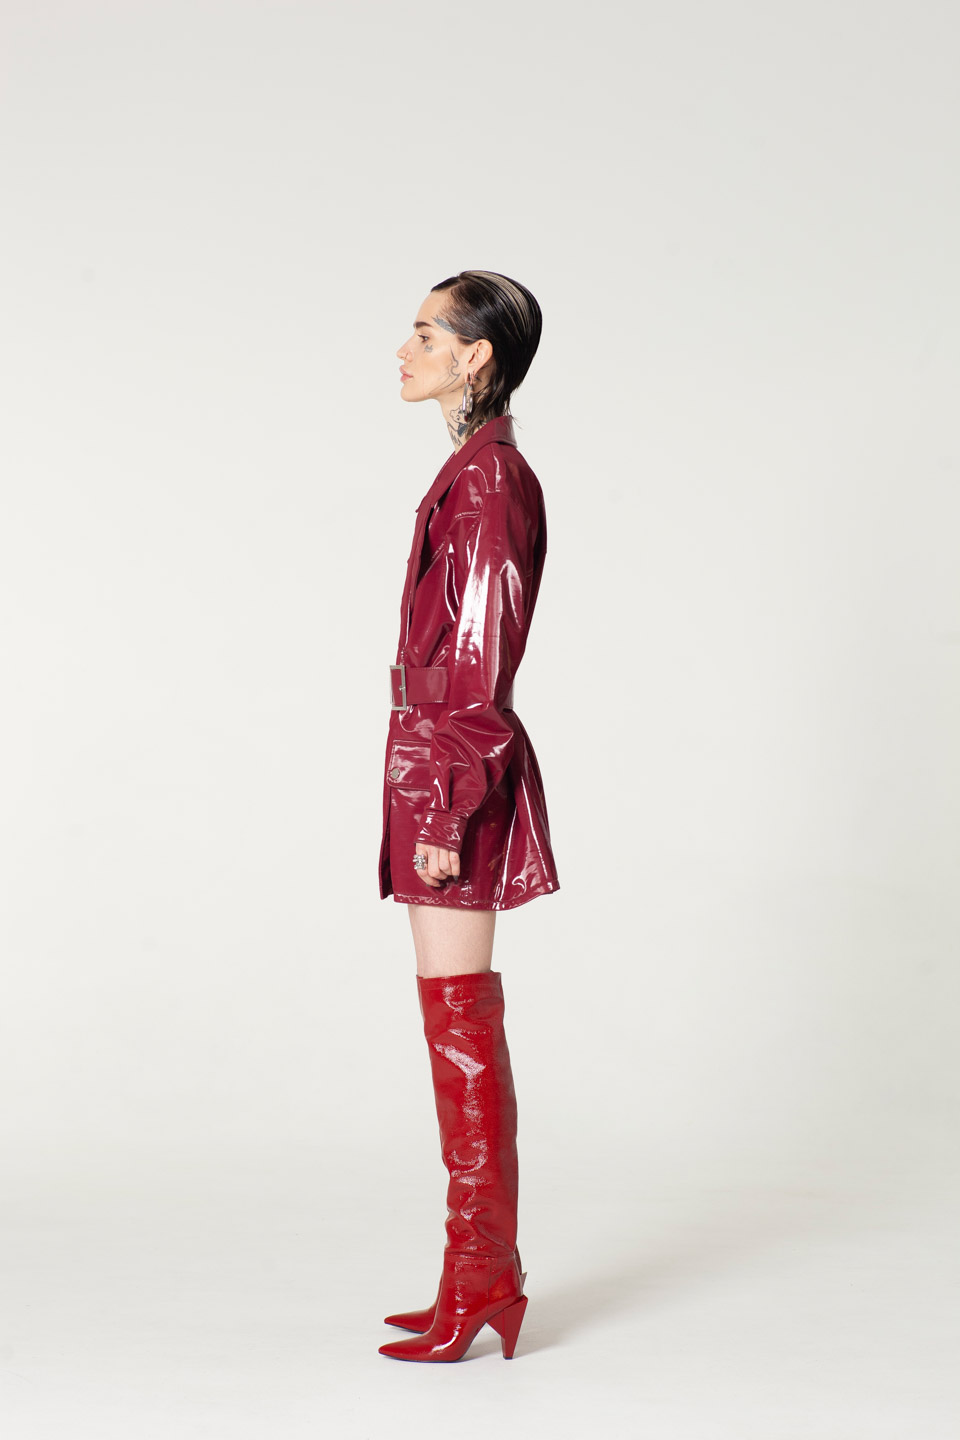 Trench coat in burgundy red 